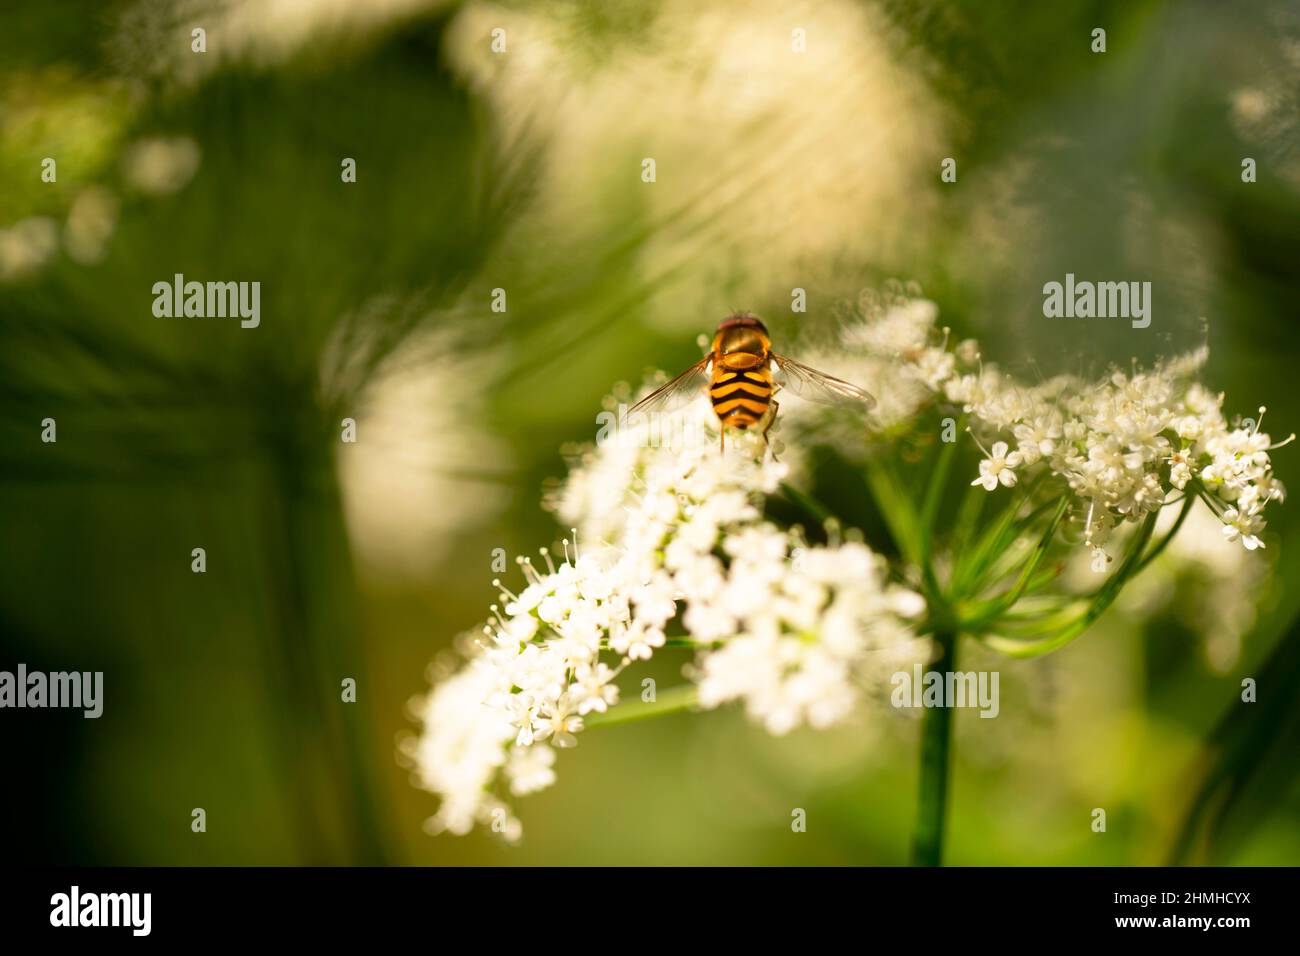 Umbellifers, white flowers, insect, blurred natural background, nature, Finland Stock Photo